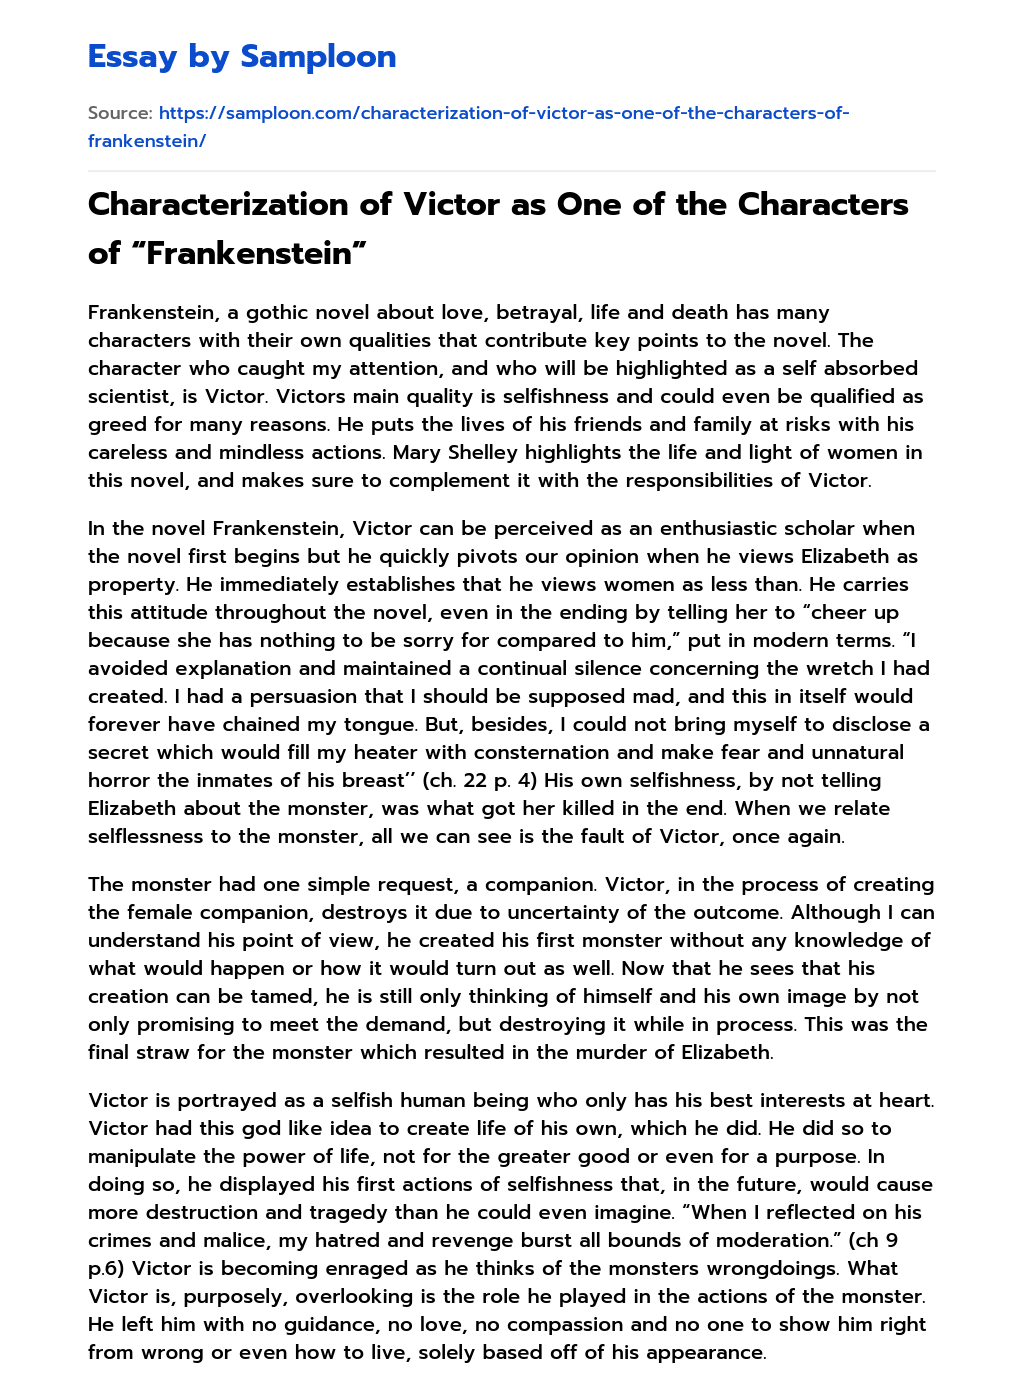 Characterization of Victor as One of the Characters of “Frankenstein” essay